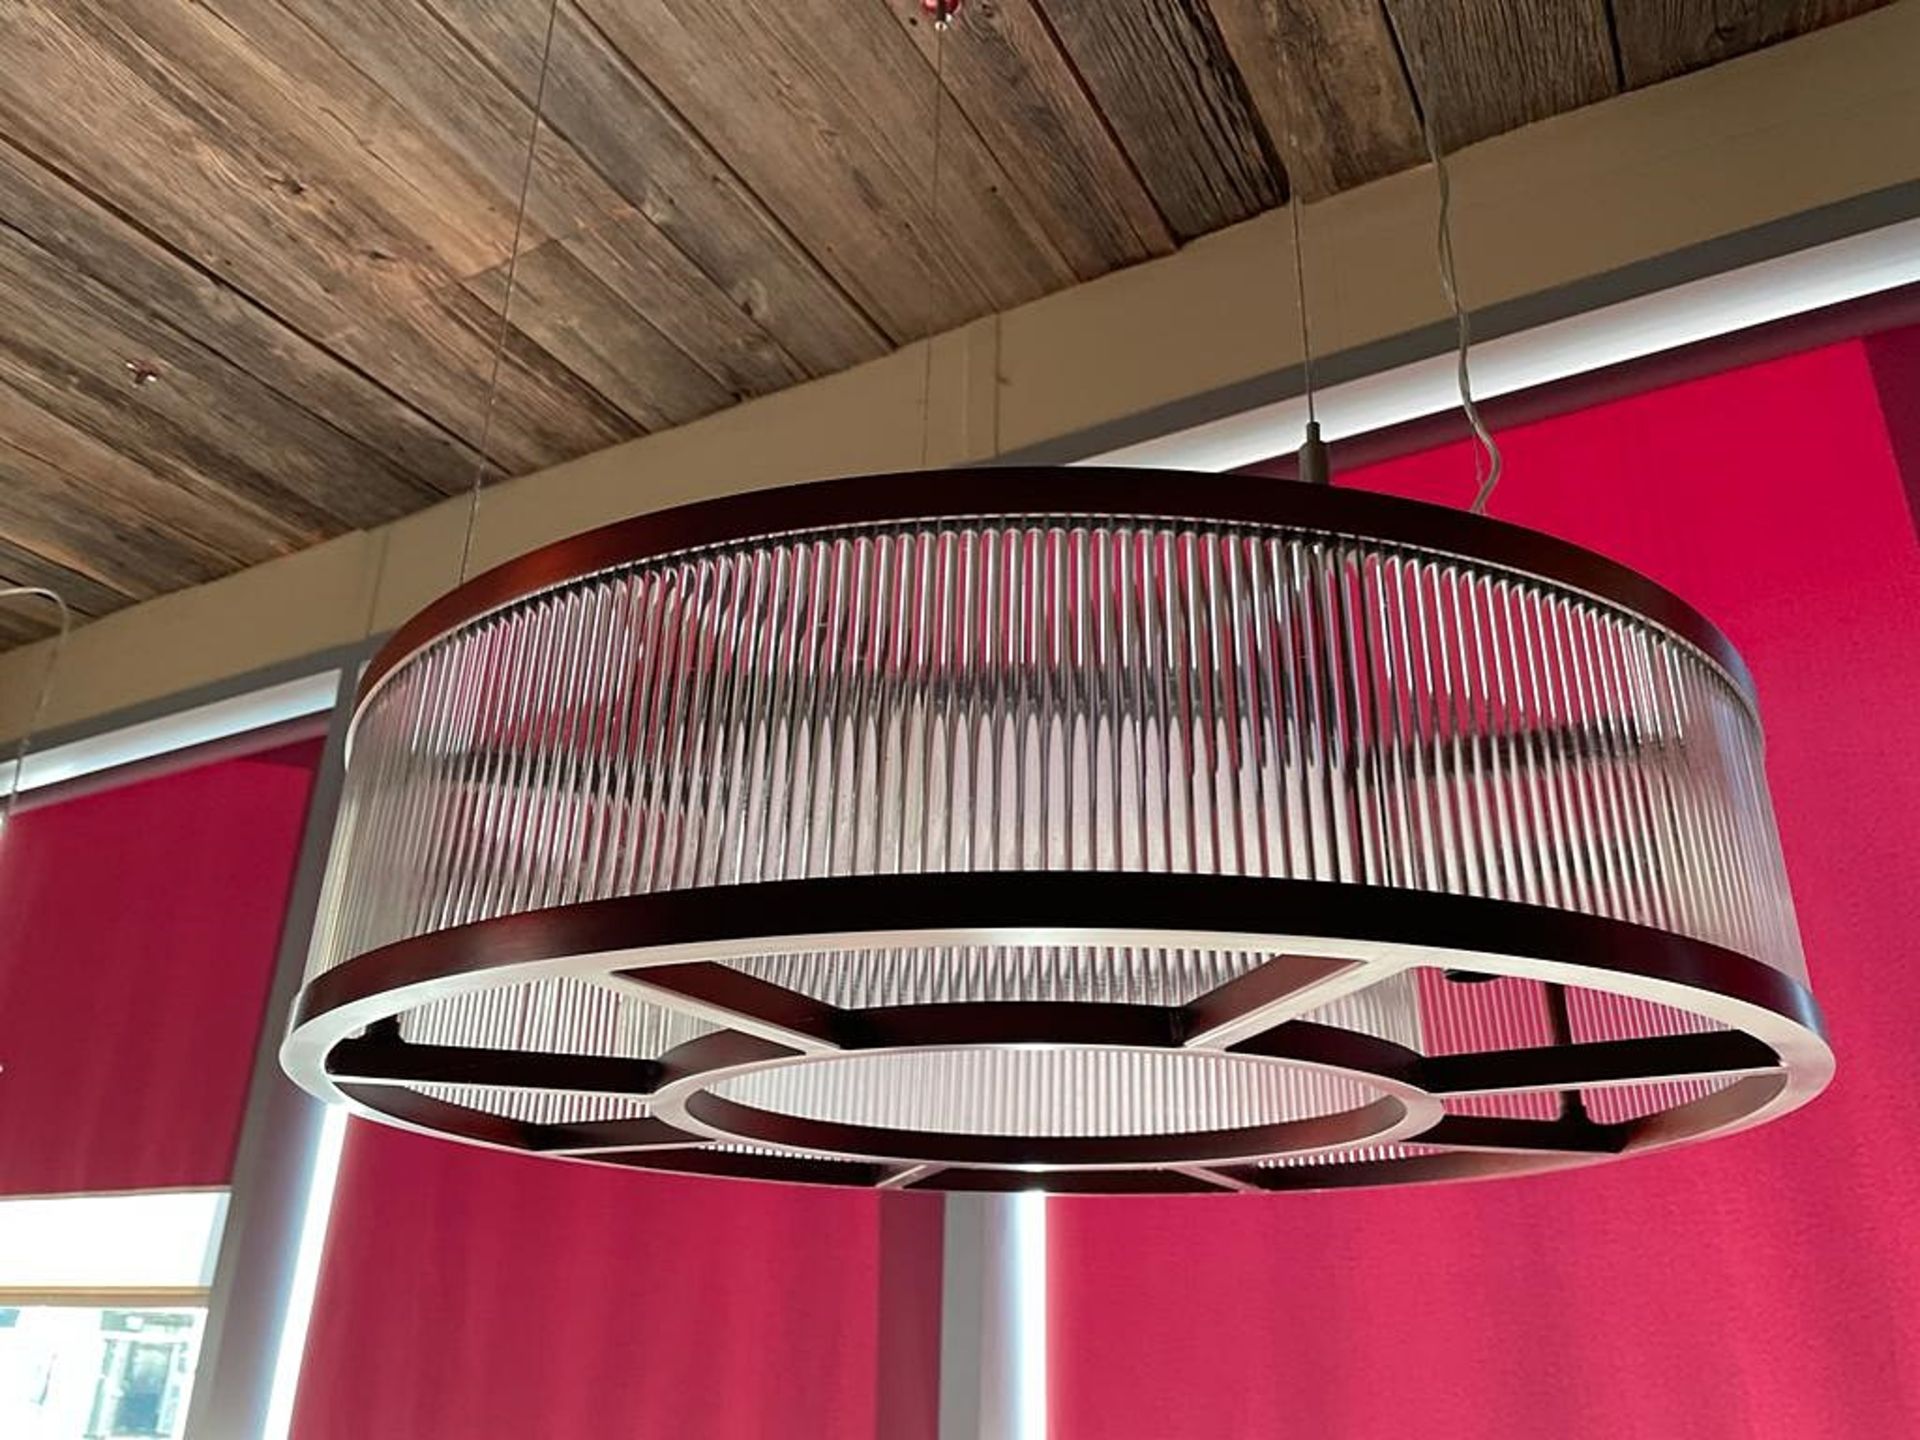 1 x Large Commercial Circular Art Deco-Style Suspended Light Fitting - Features A Copper Finish